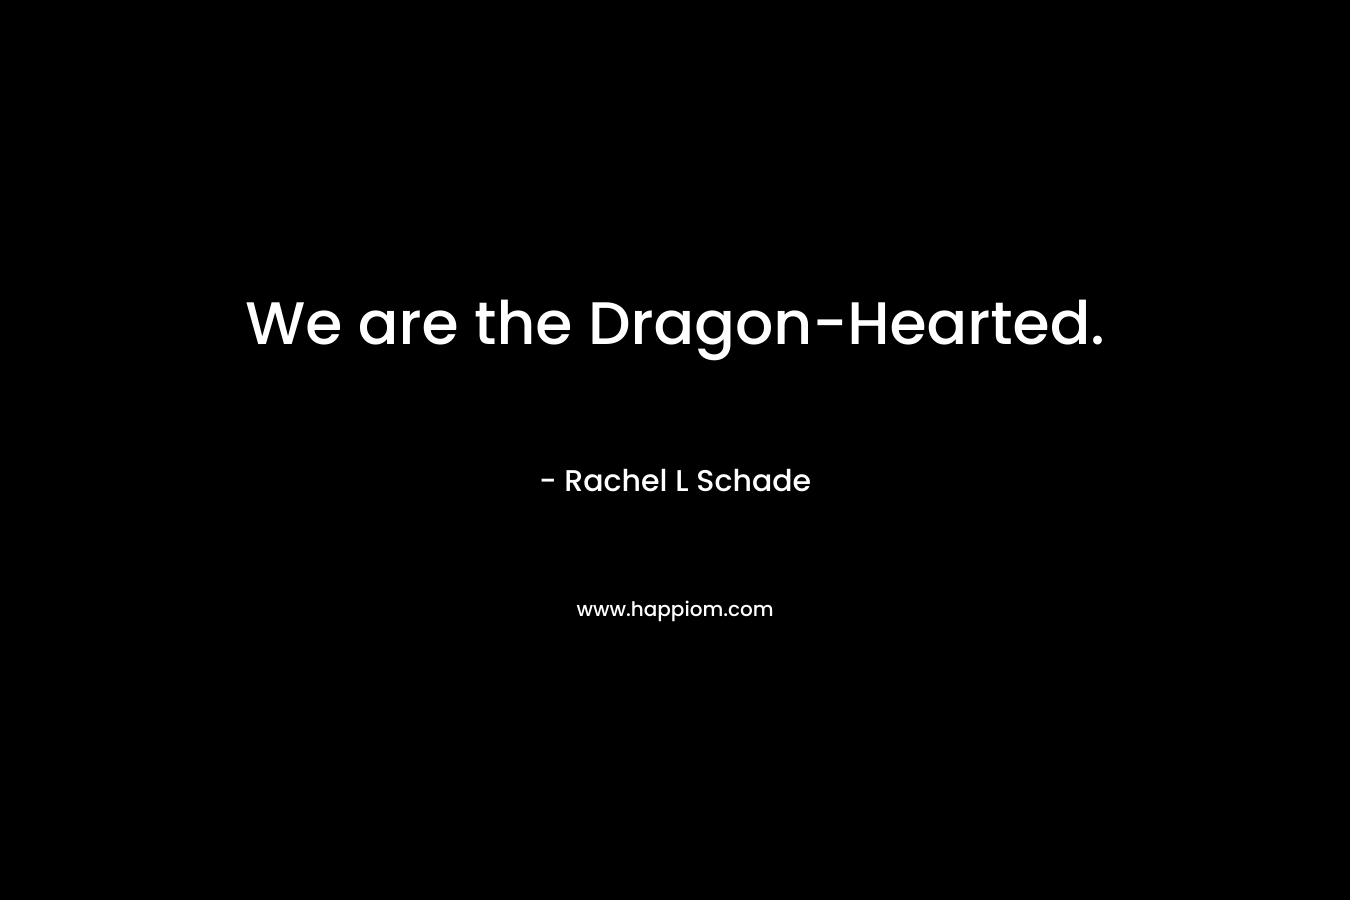 We are the Dragon-Hearted.